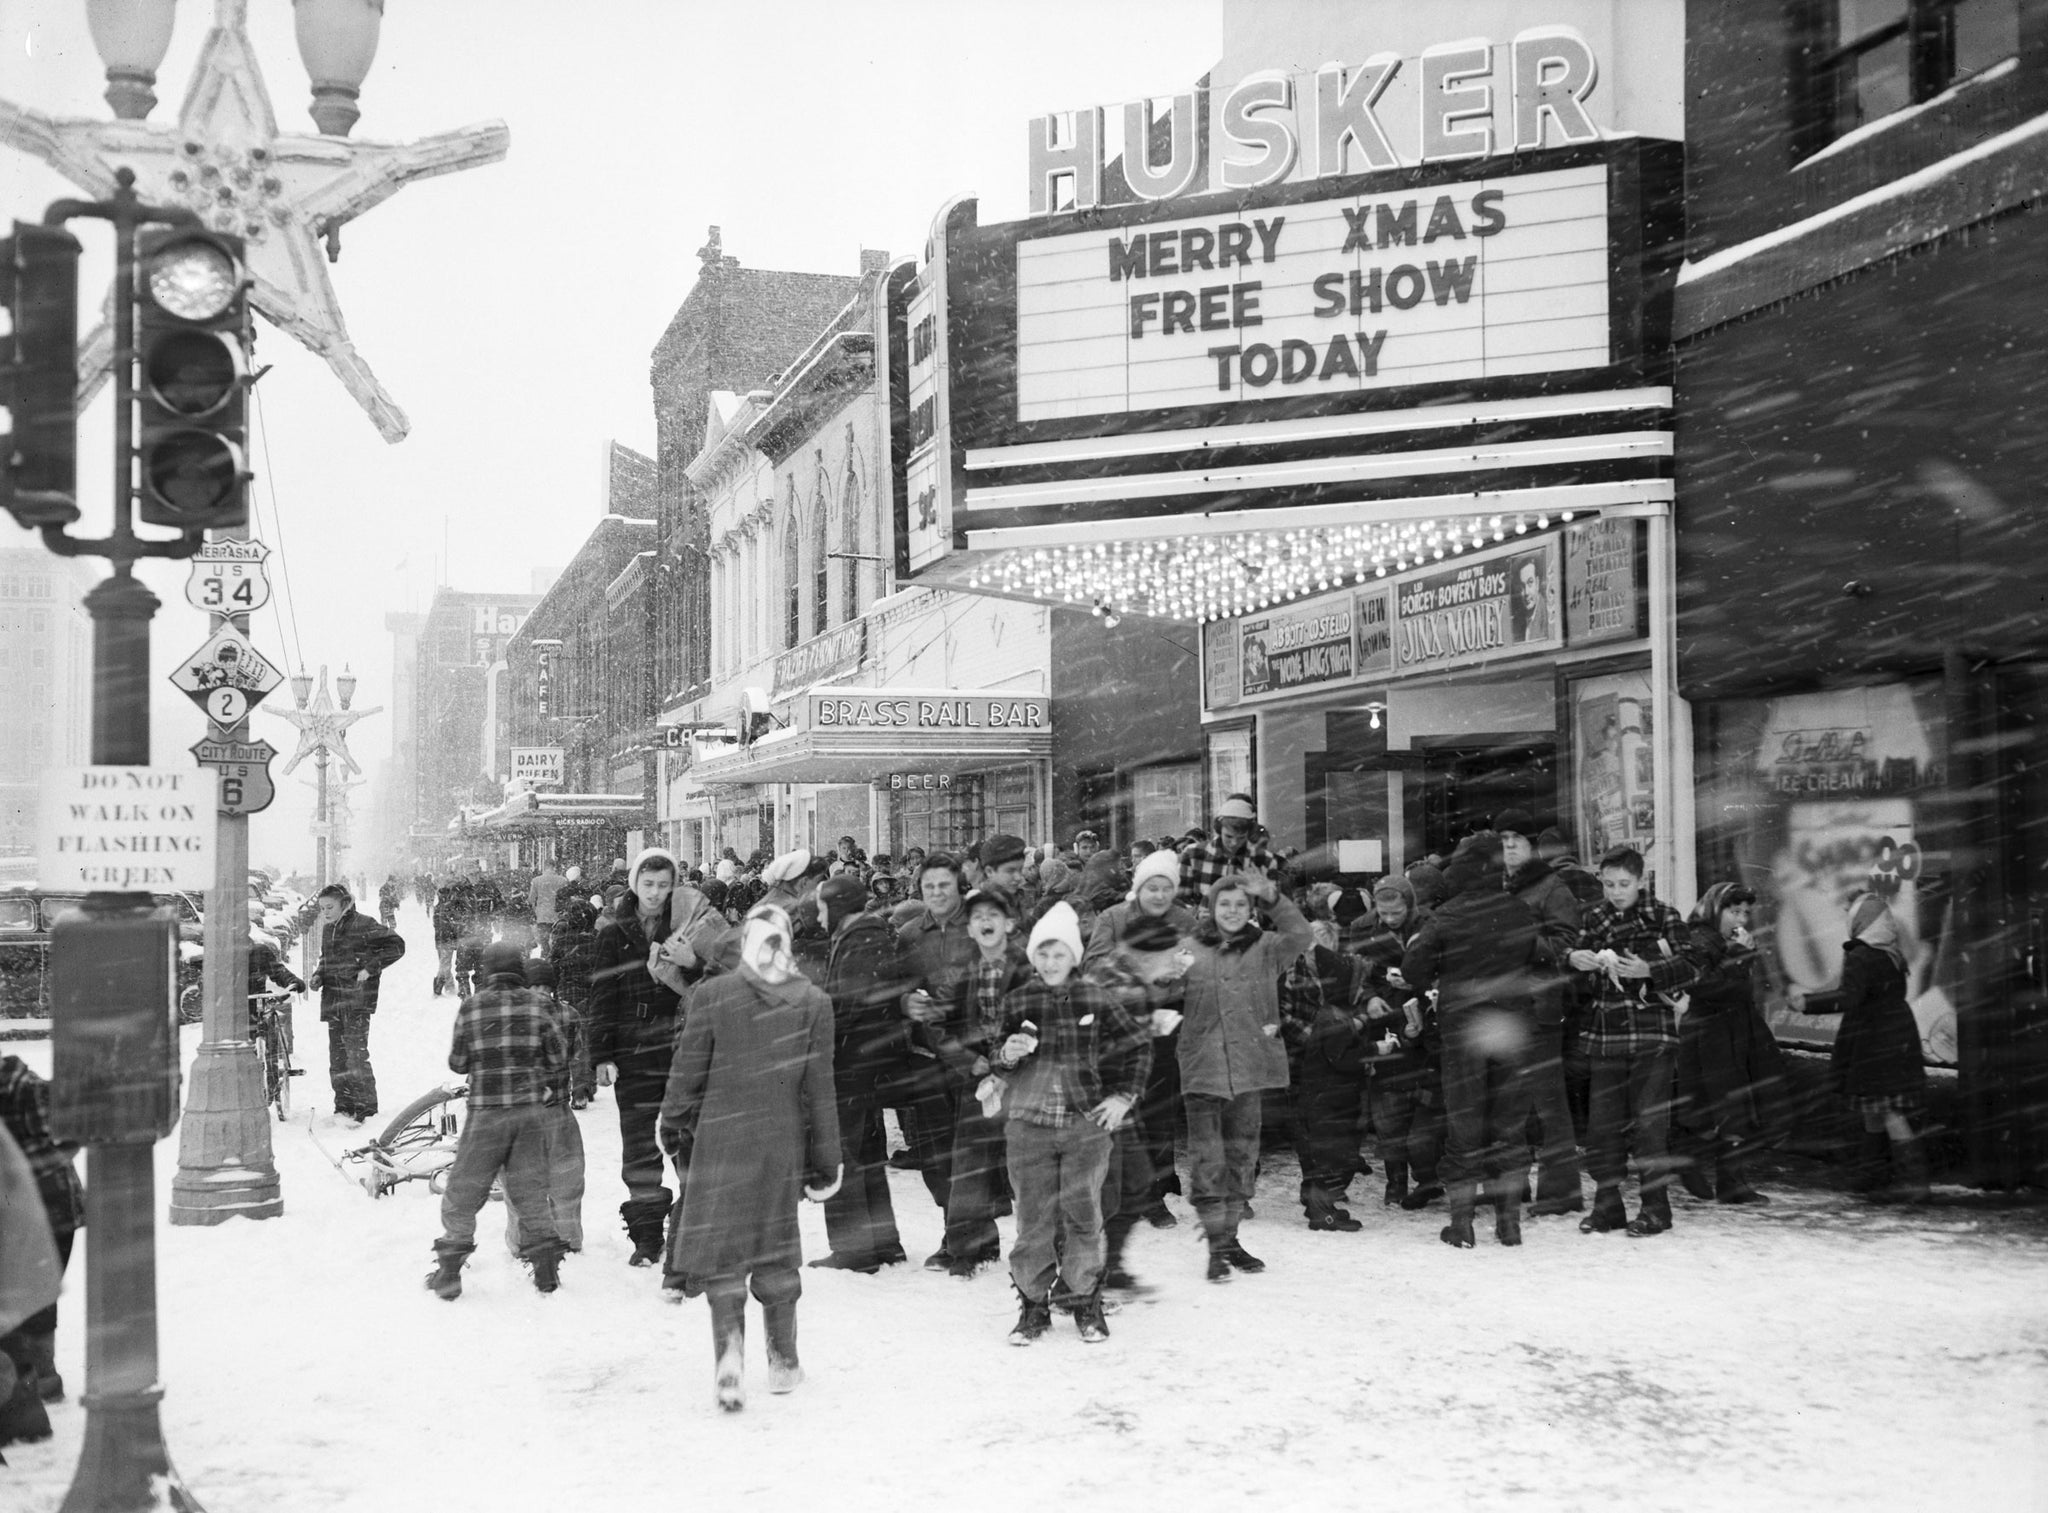 A group of children in front of the Husker Theater, located at 1444 O Street, on Christmas Eve, 1948. -- NEBRASKA STATE HISTORICAL SOCIETY / #RG2183.PH001948-001224